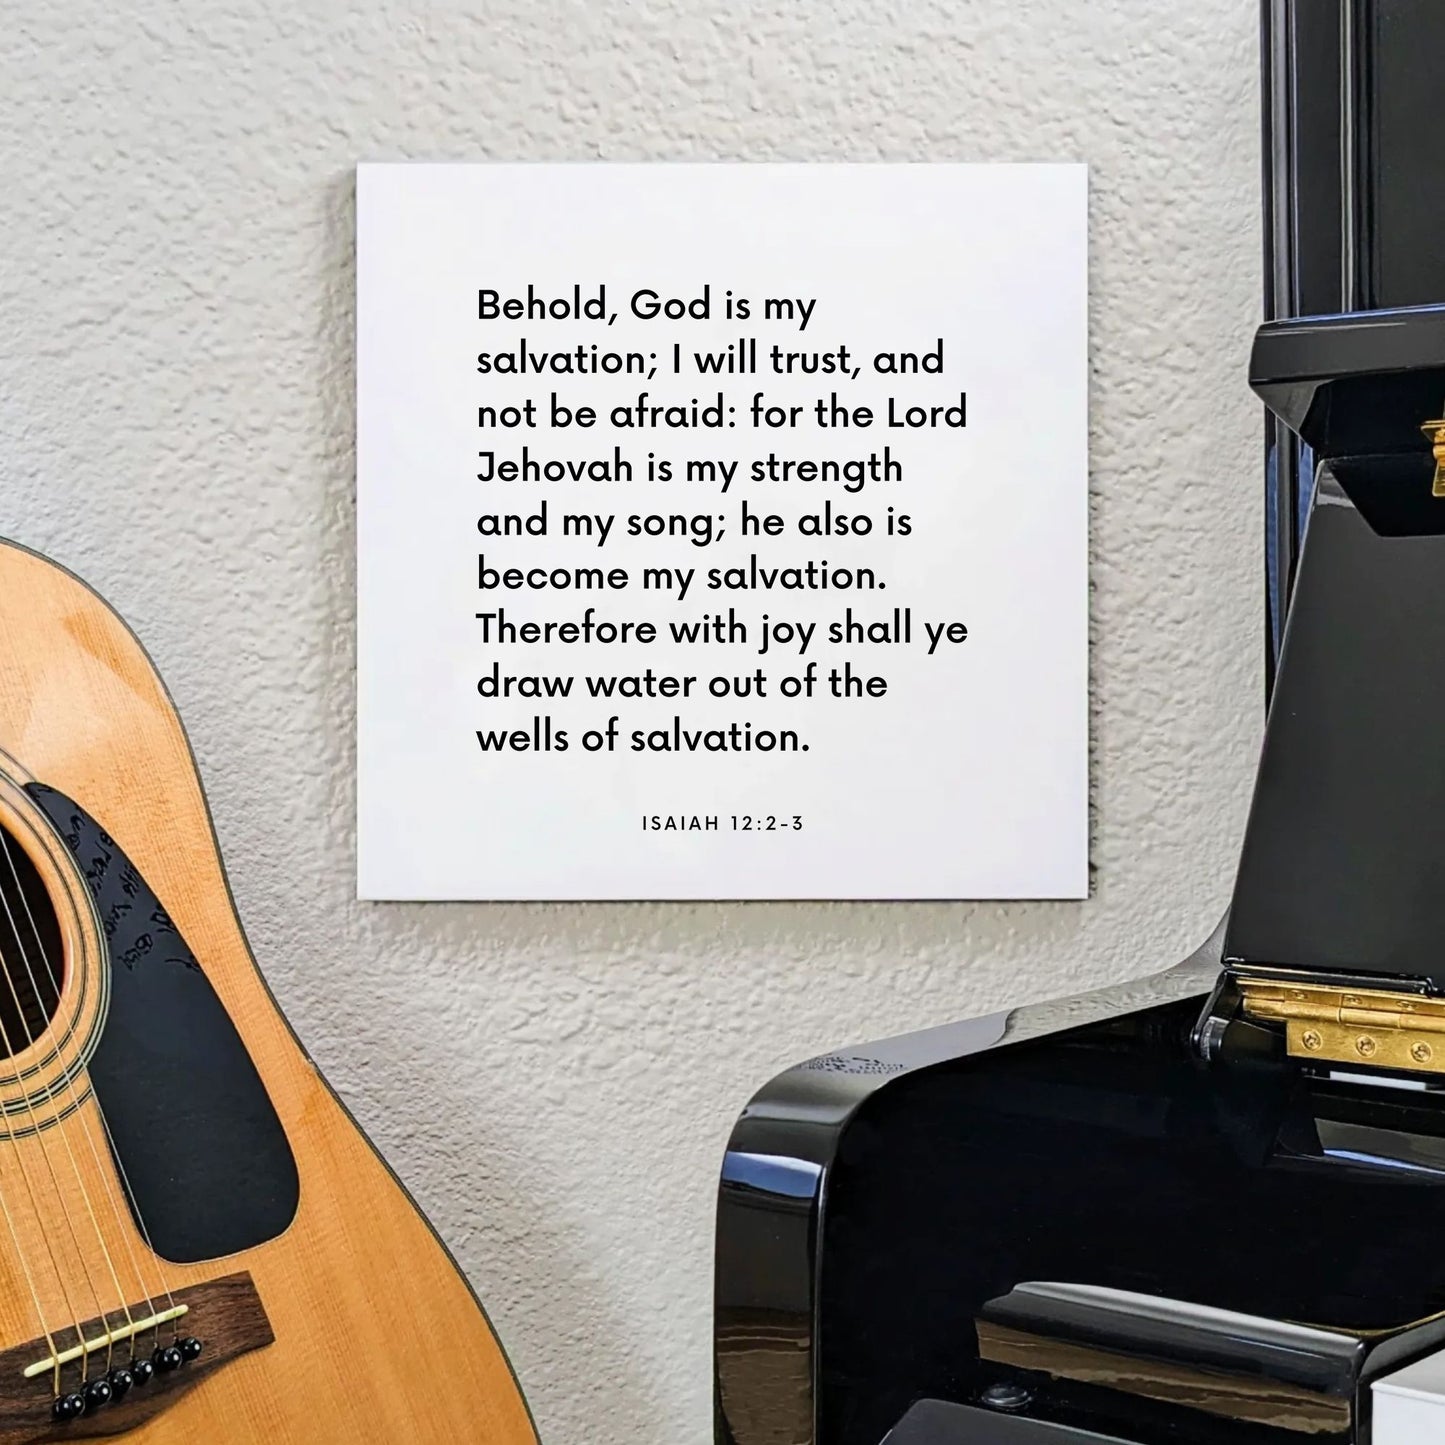 Music mouting of the scripture tile for Isaiah 12:2-3 - "The Lord Jehovah is my strength and my song"